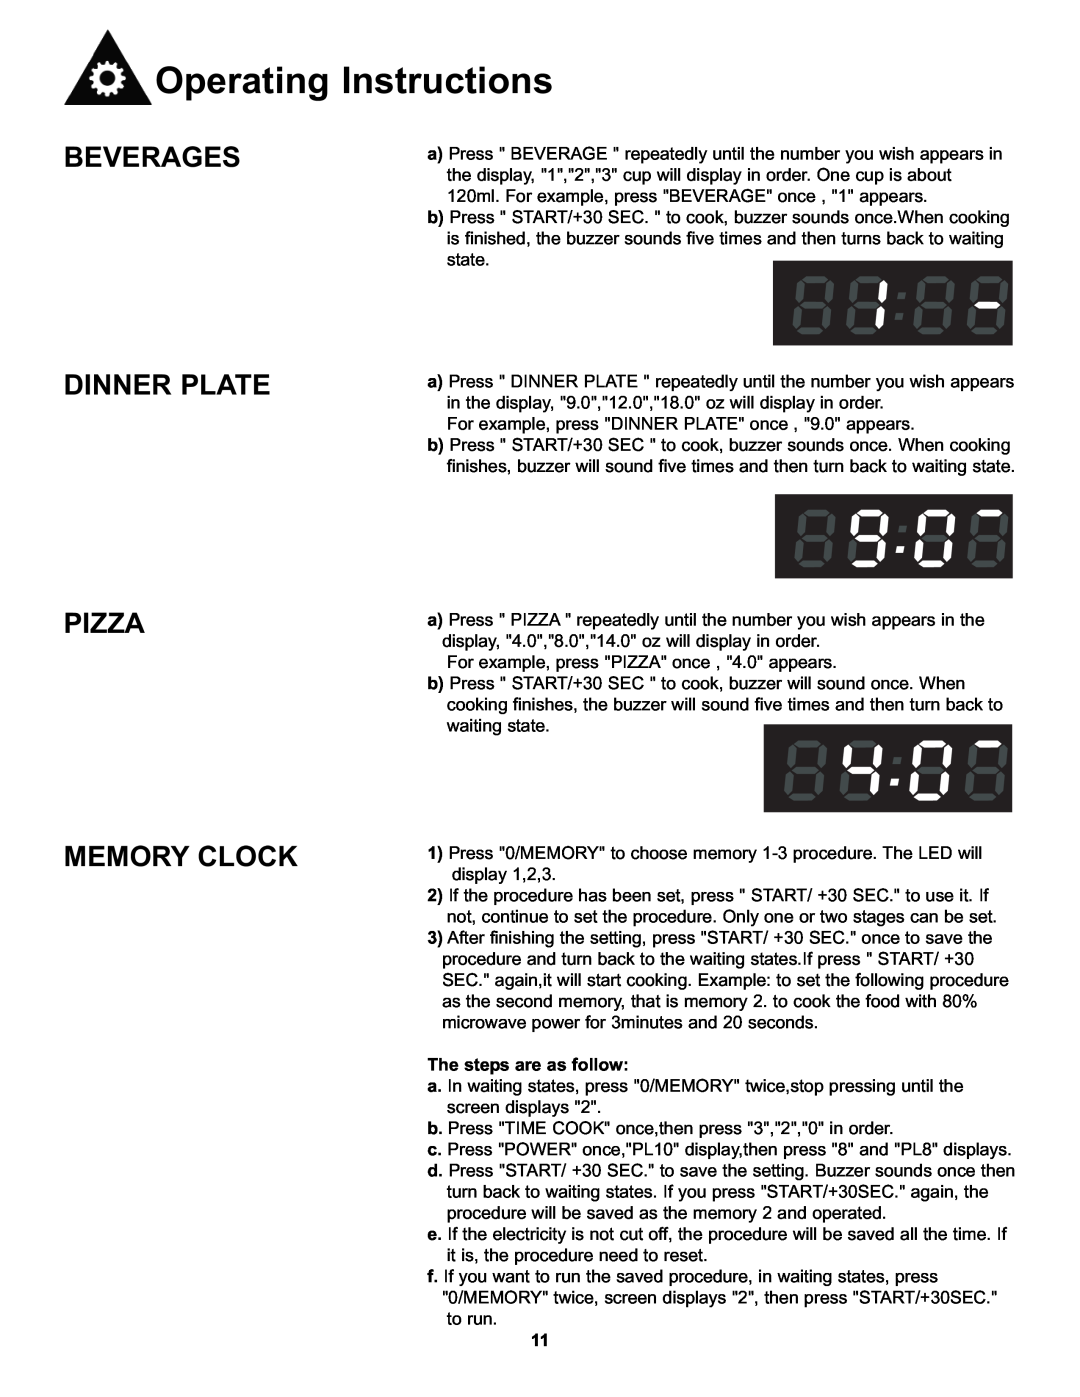 Danby DMW7700WDB manual Beverages Dinner Plate Pizza Memory Clock, Operating Instructions, The steps are as follow 